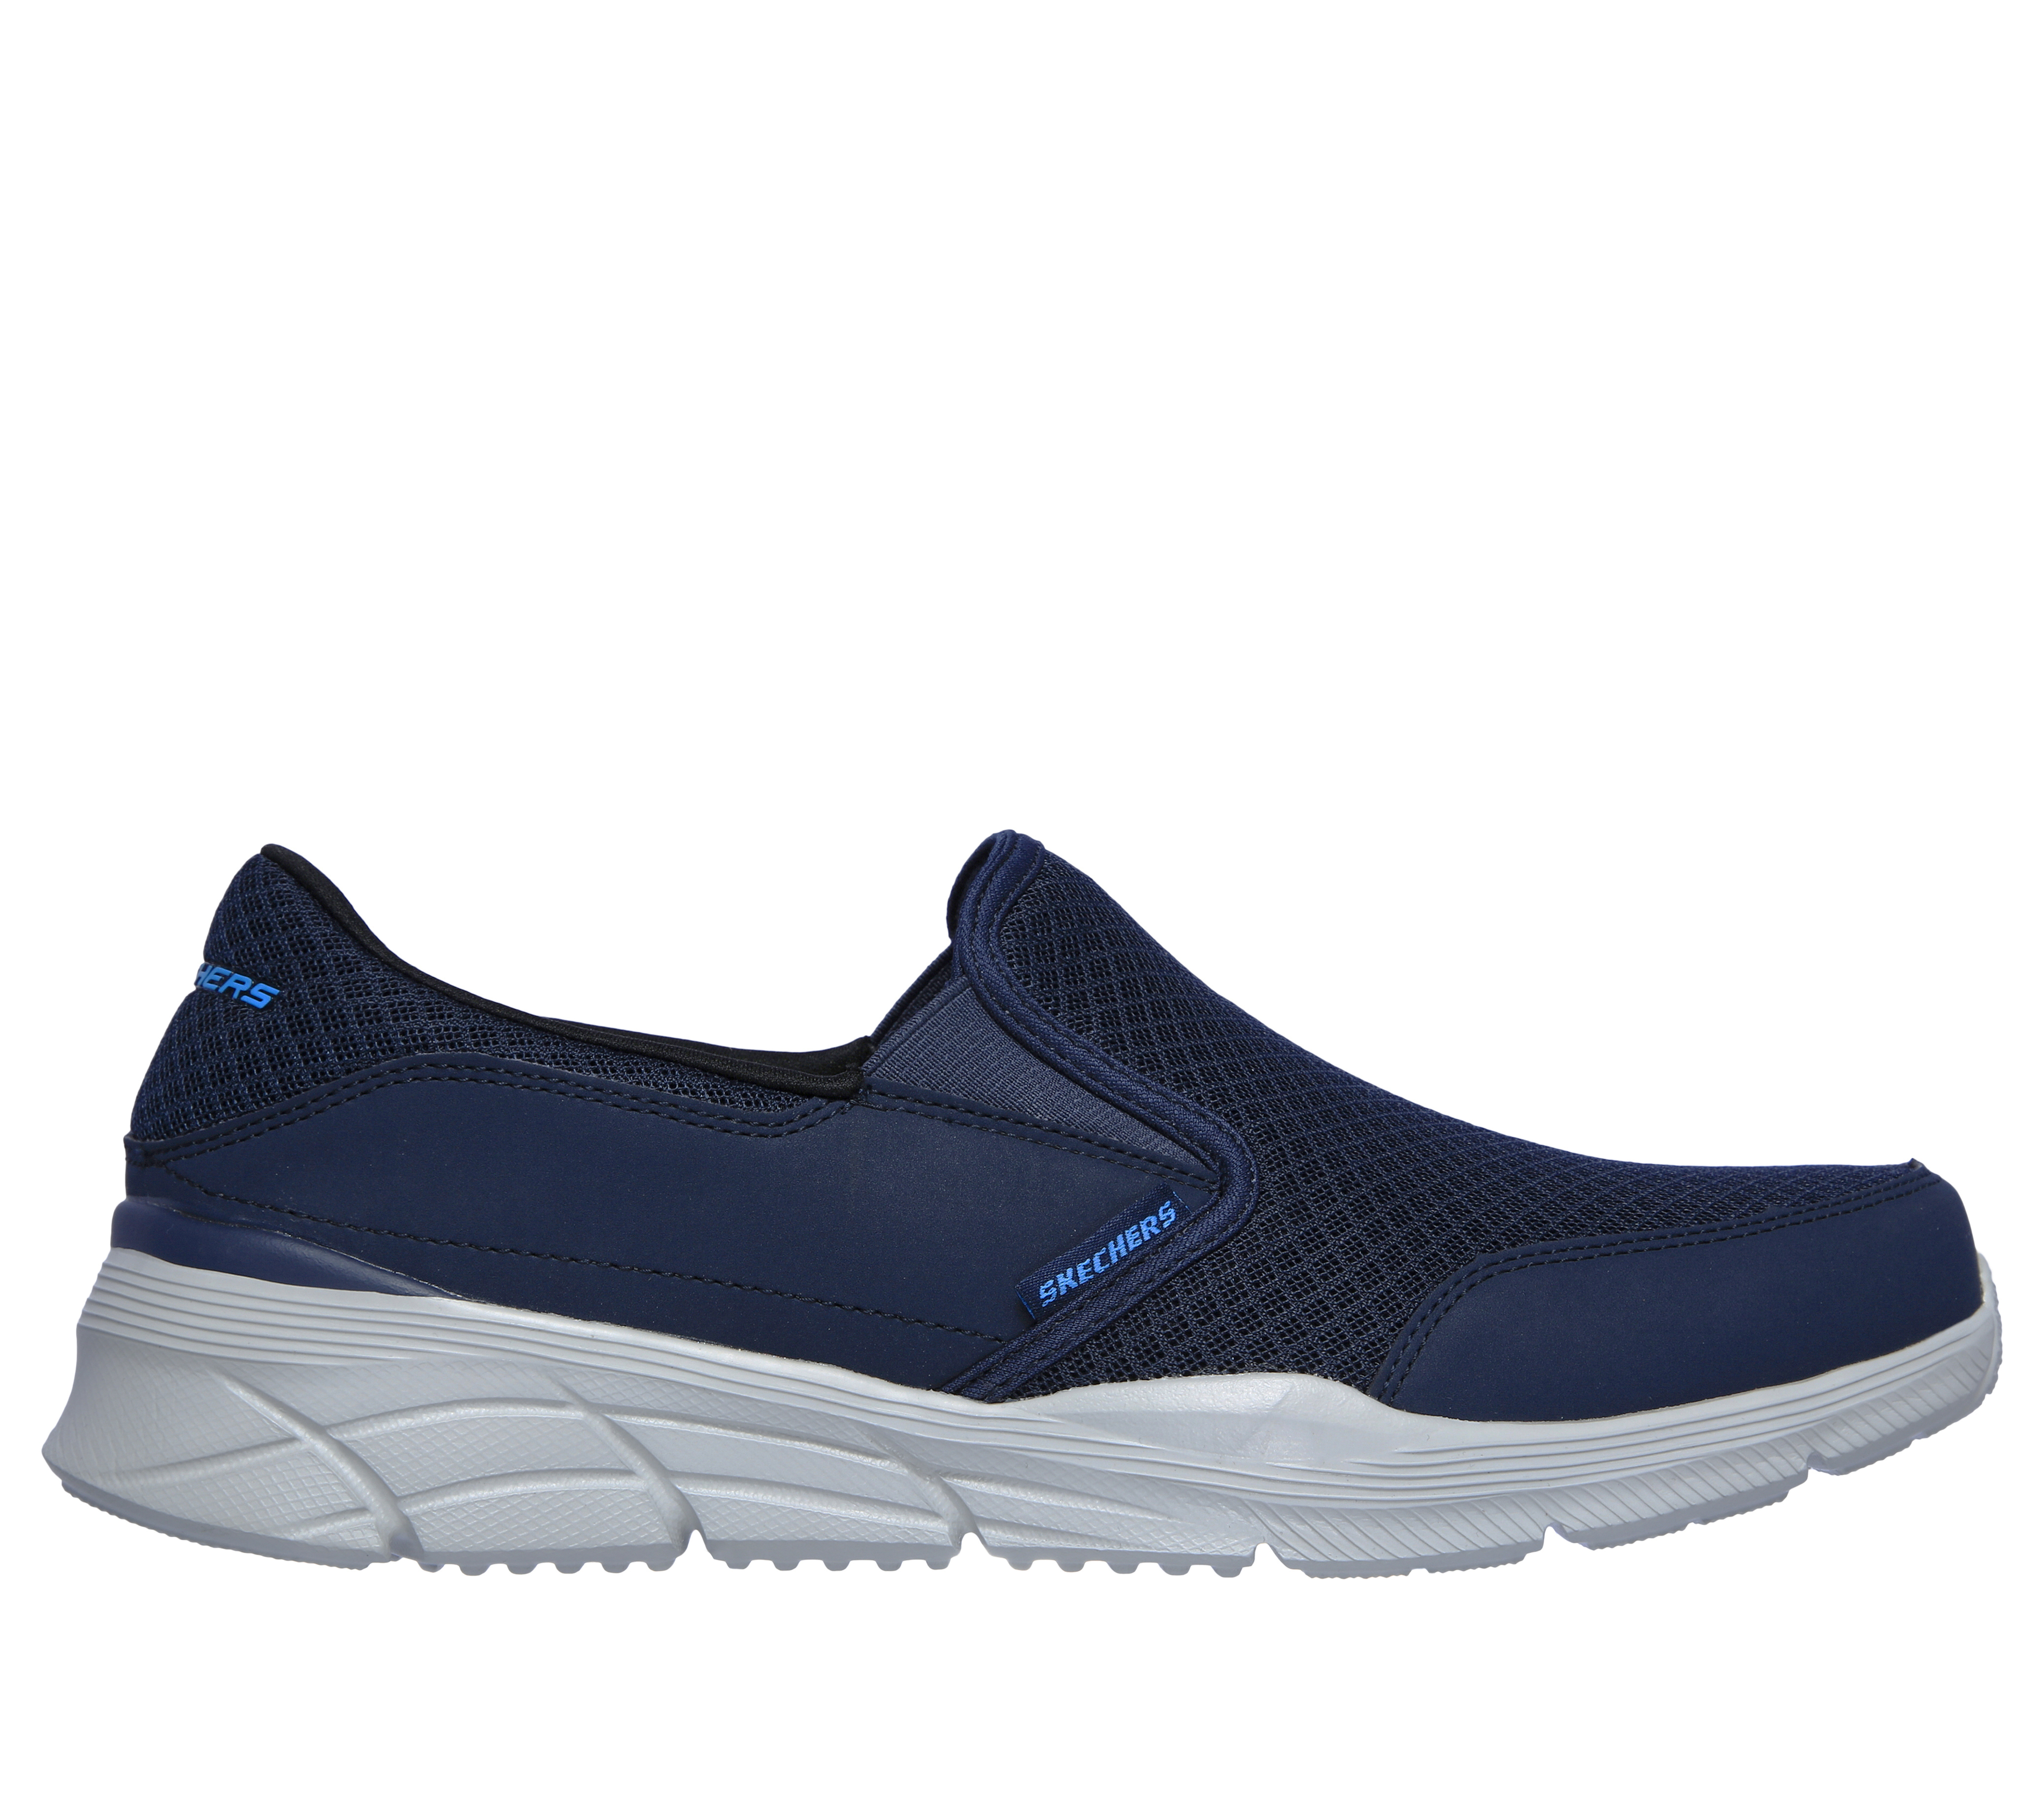 skechers relaxed fit blue